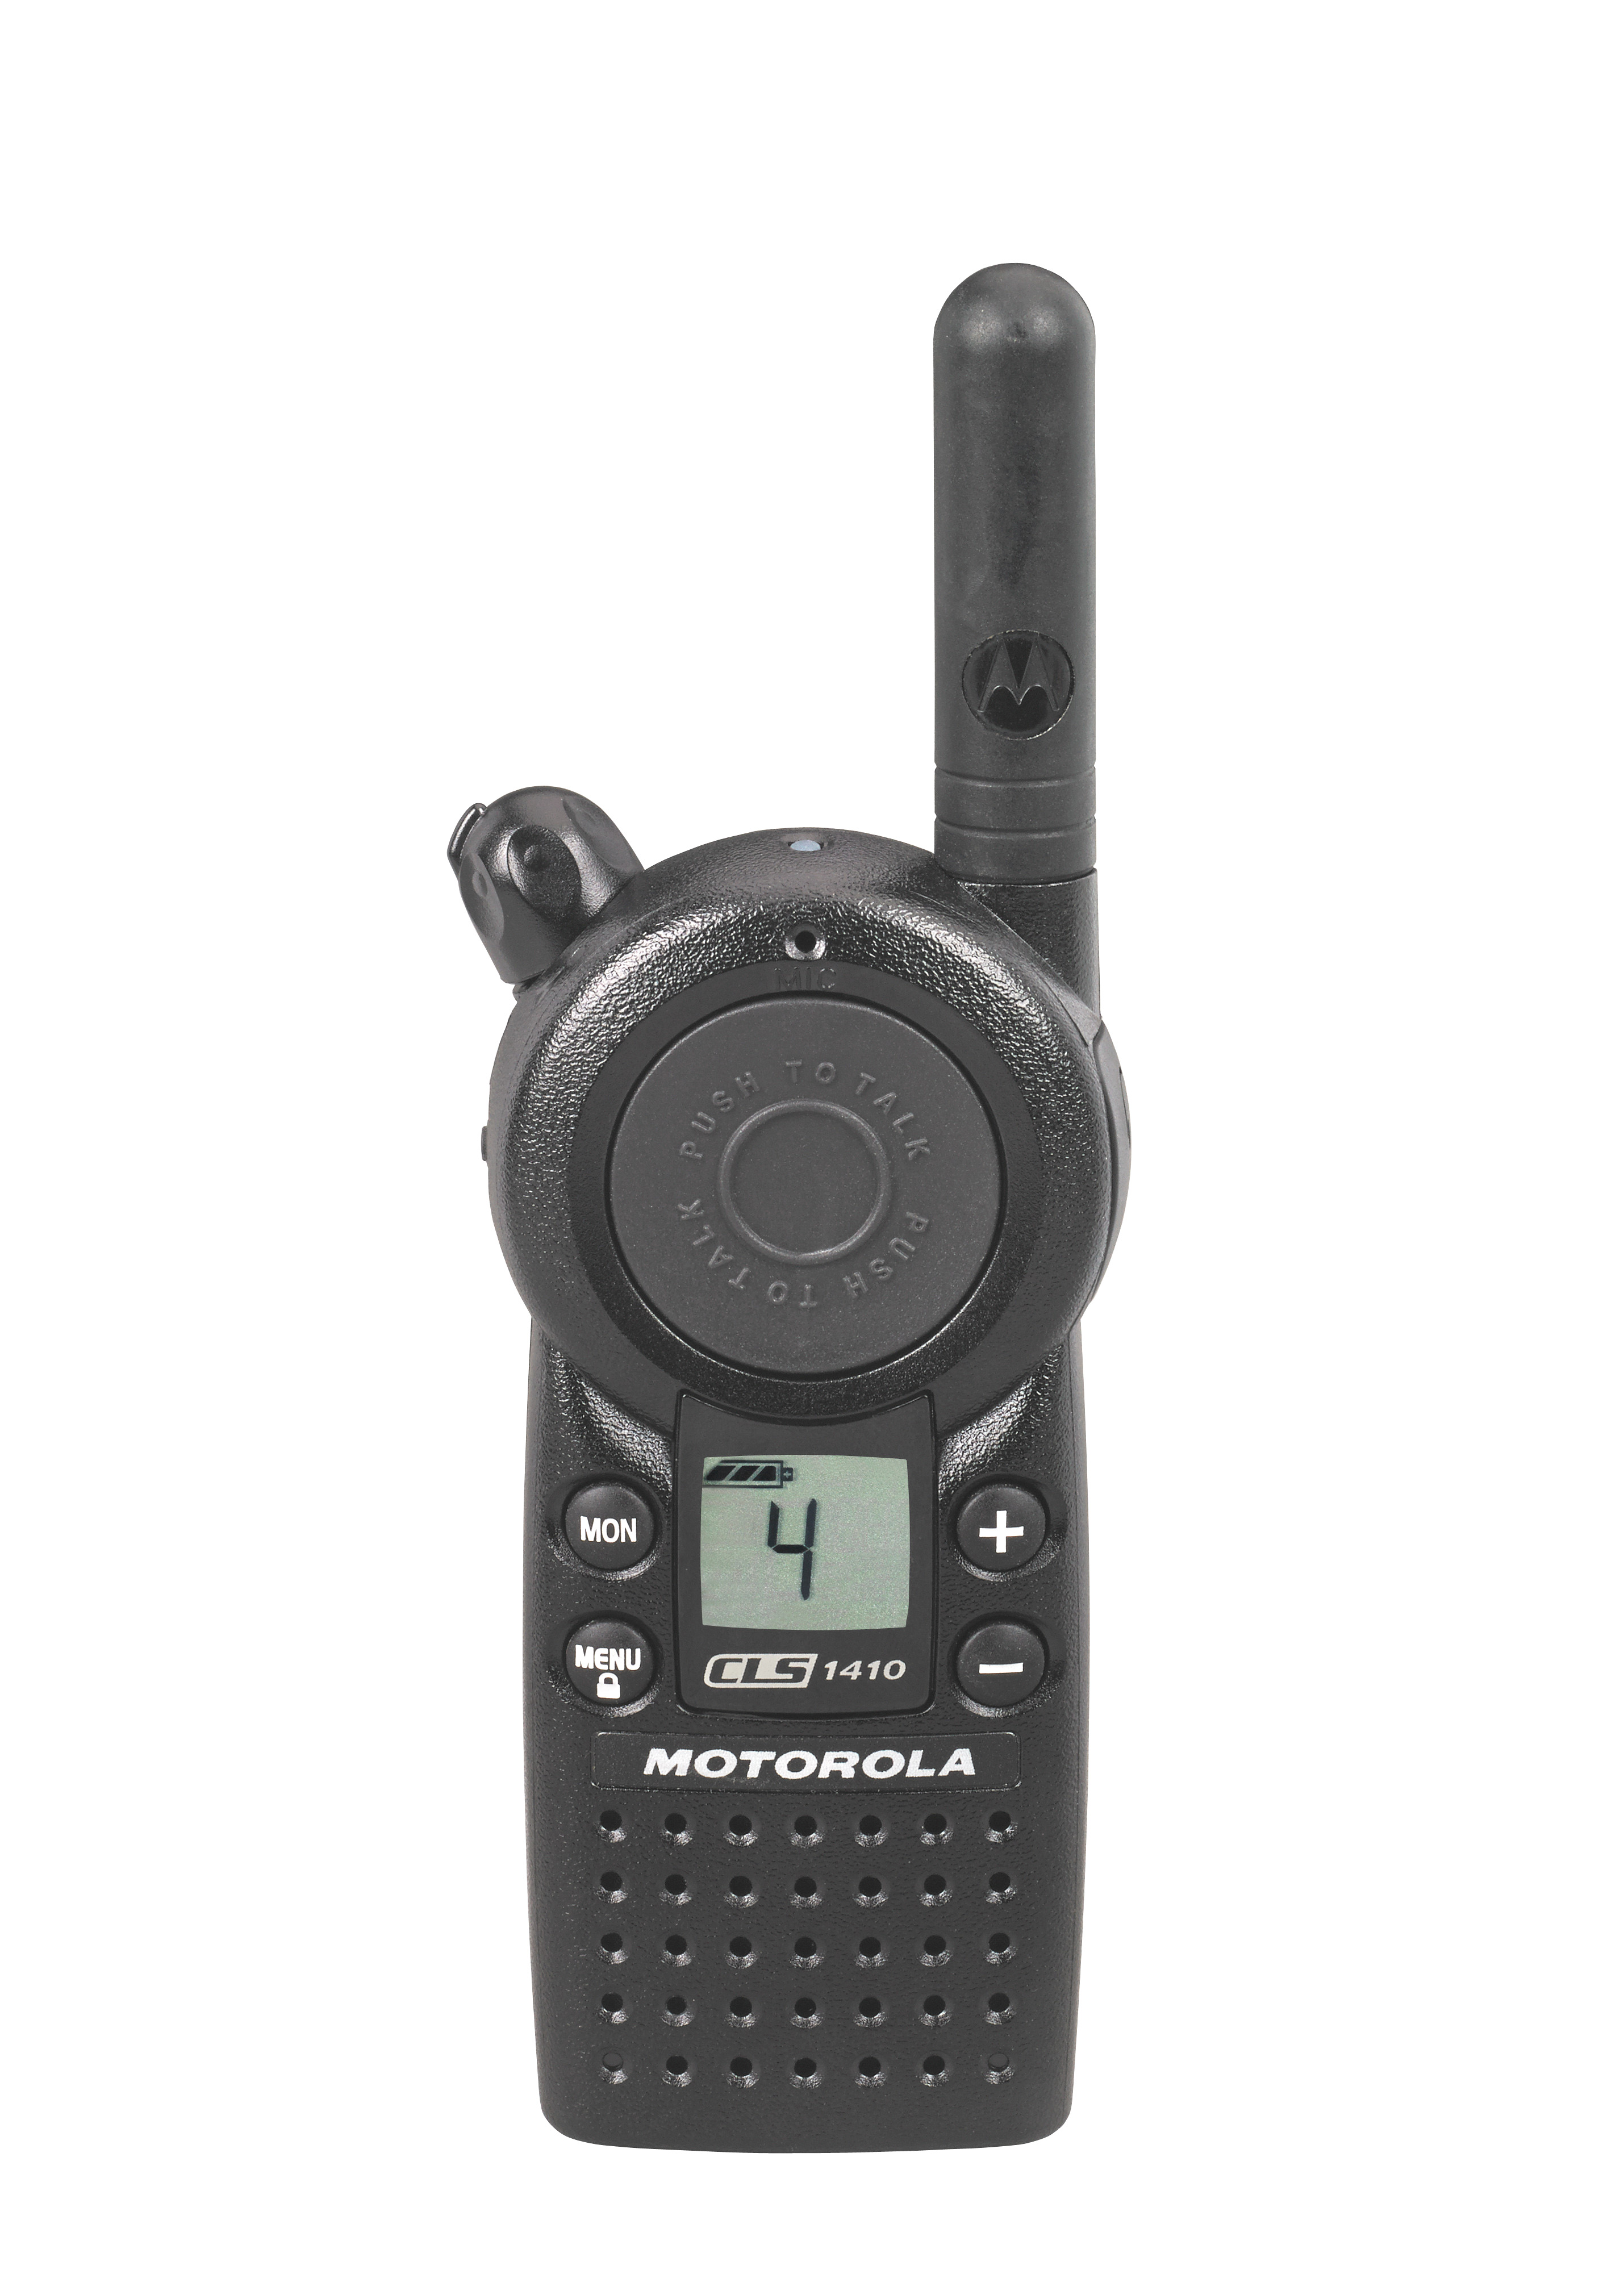 Motorola CLS Series two-way radios are simple, rugged, and reliable, with intuitive controls that are easy to use.